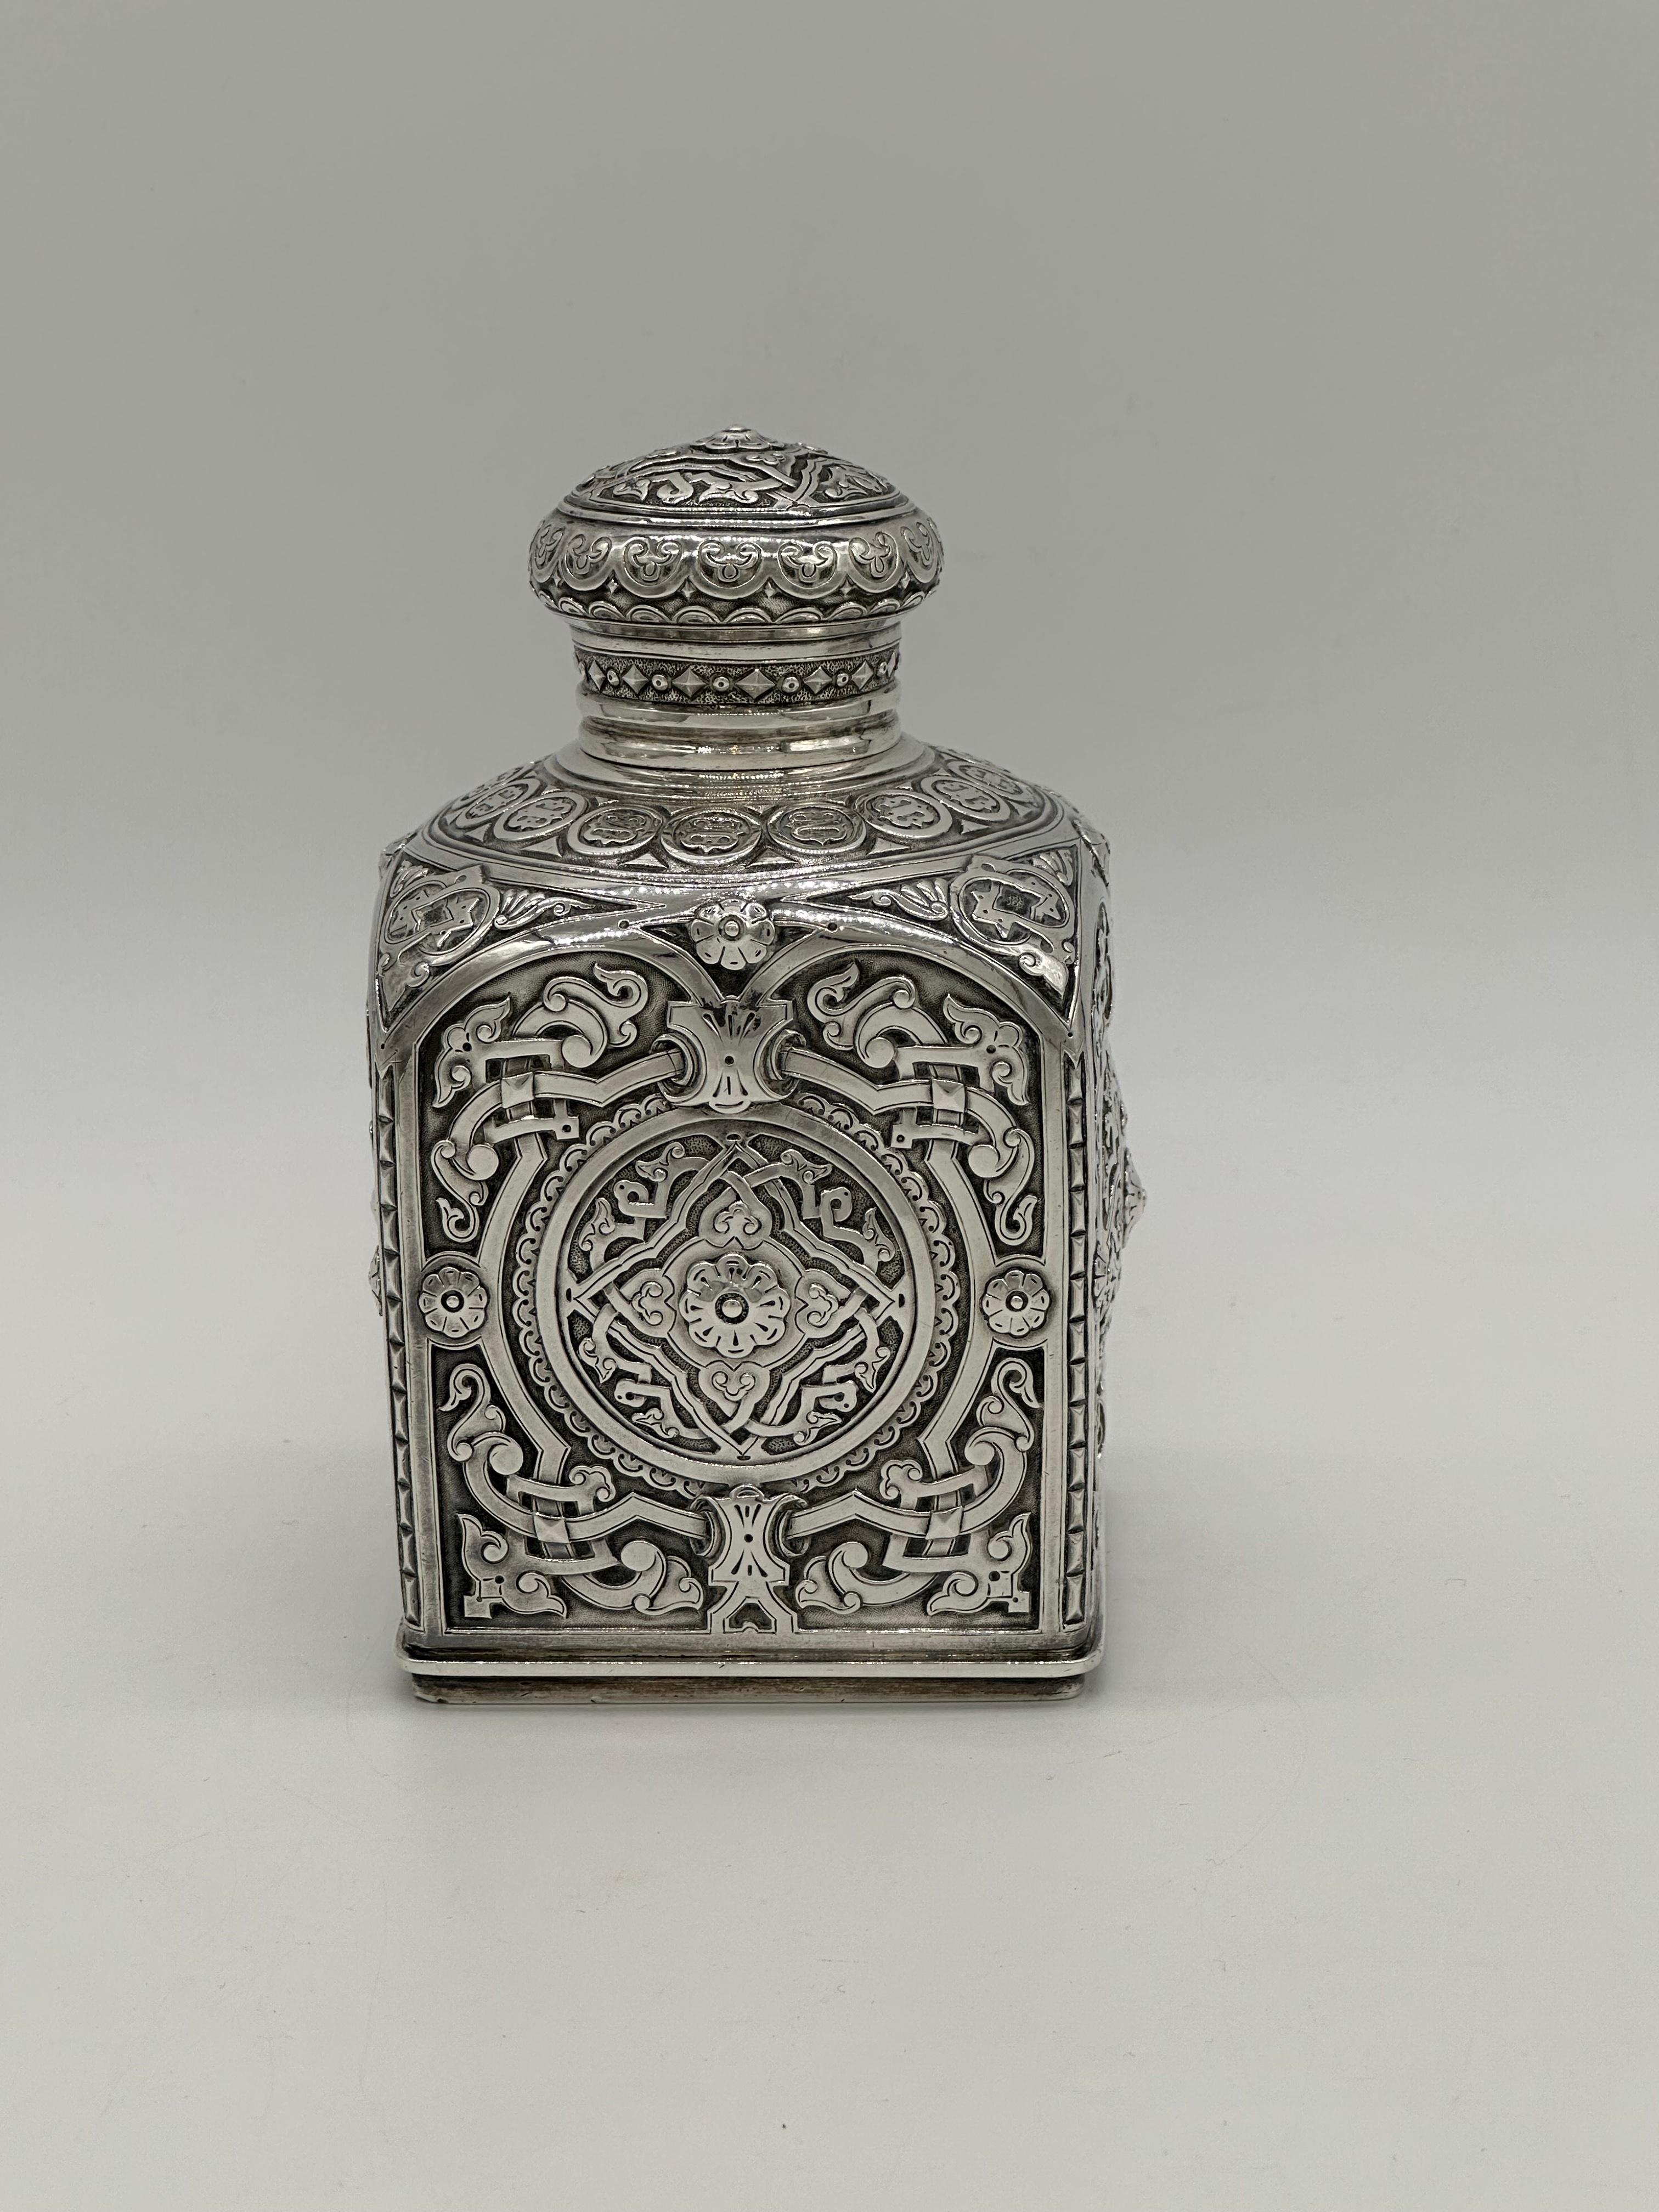 A fine quality antique Russian Imperial silver tea caddy, engraved and hand Embossed in the classical Russian style, or even islamic taste.
All hand made repoussé work, with intricate designs and engravings on Them, the repoussé work is very deep